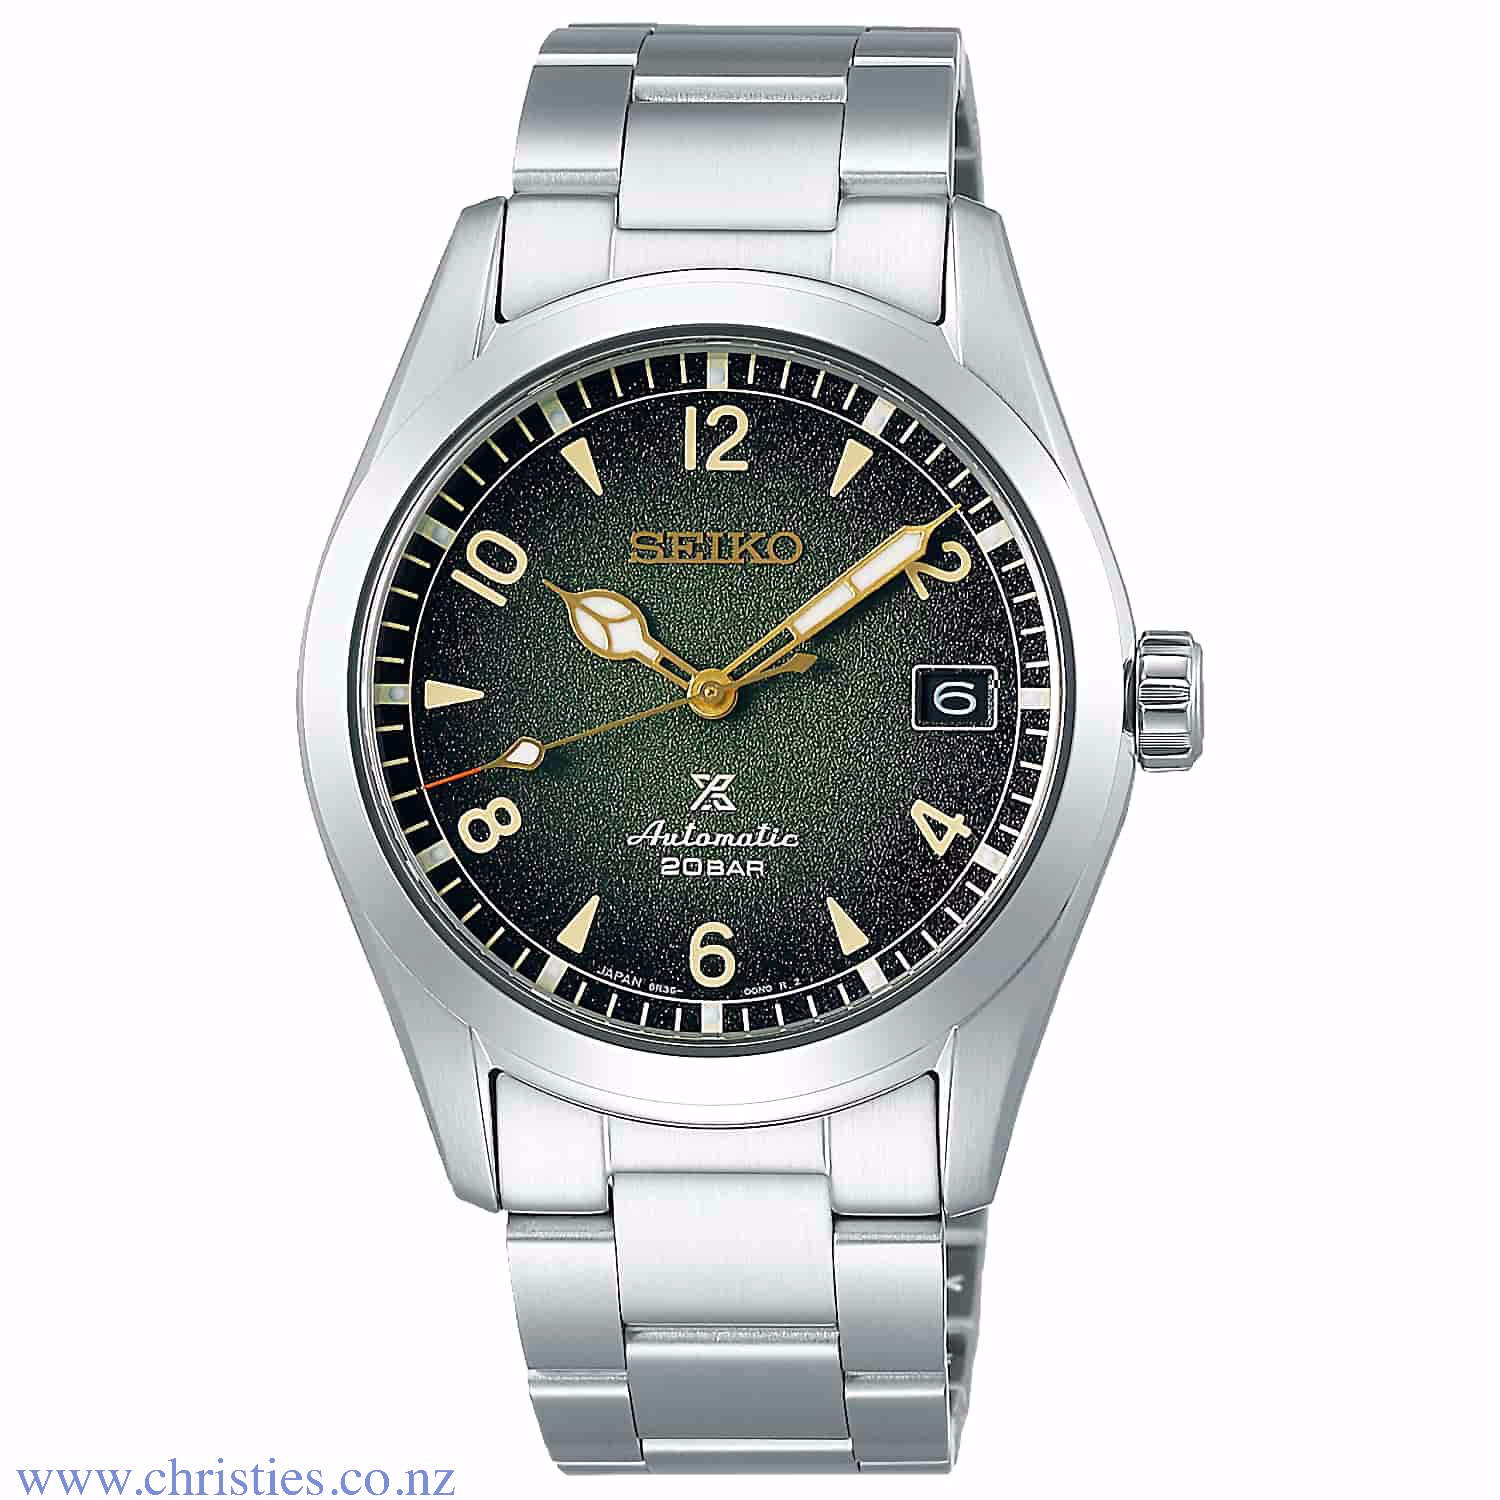 SPB155J SEIKO Prospex Alpinist Automatic Watch. The Seiko Alpinist series is a beloved staple of enthusiasts on watch forums and Instagram, with its comfortable shape, size and particular Japanese take on a sophisticated field watch with a rich history. E